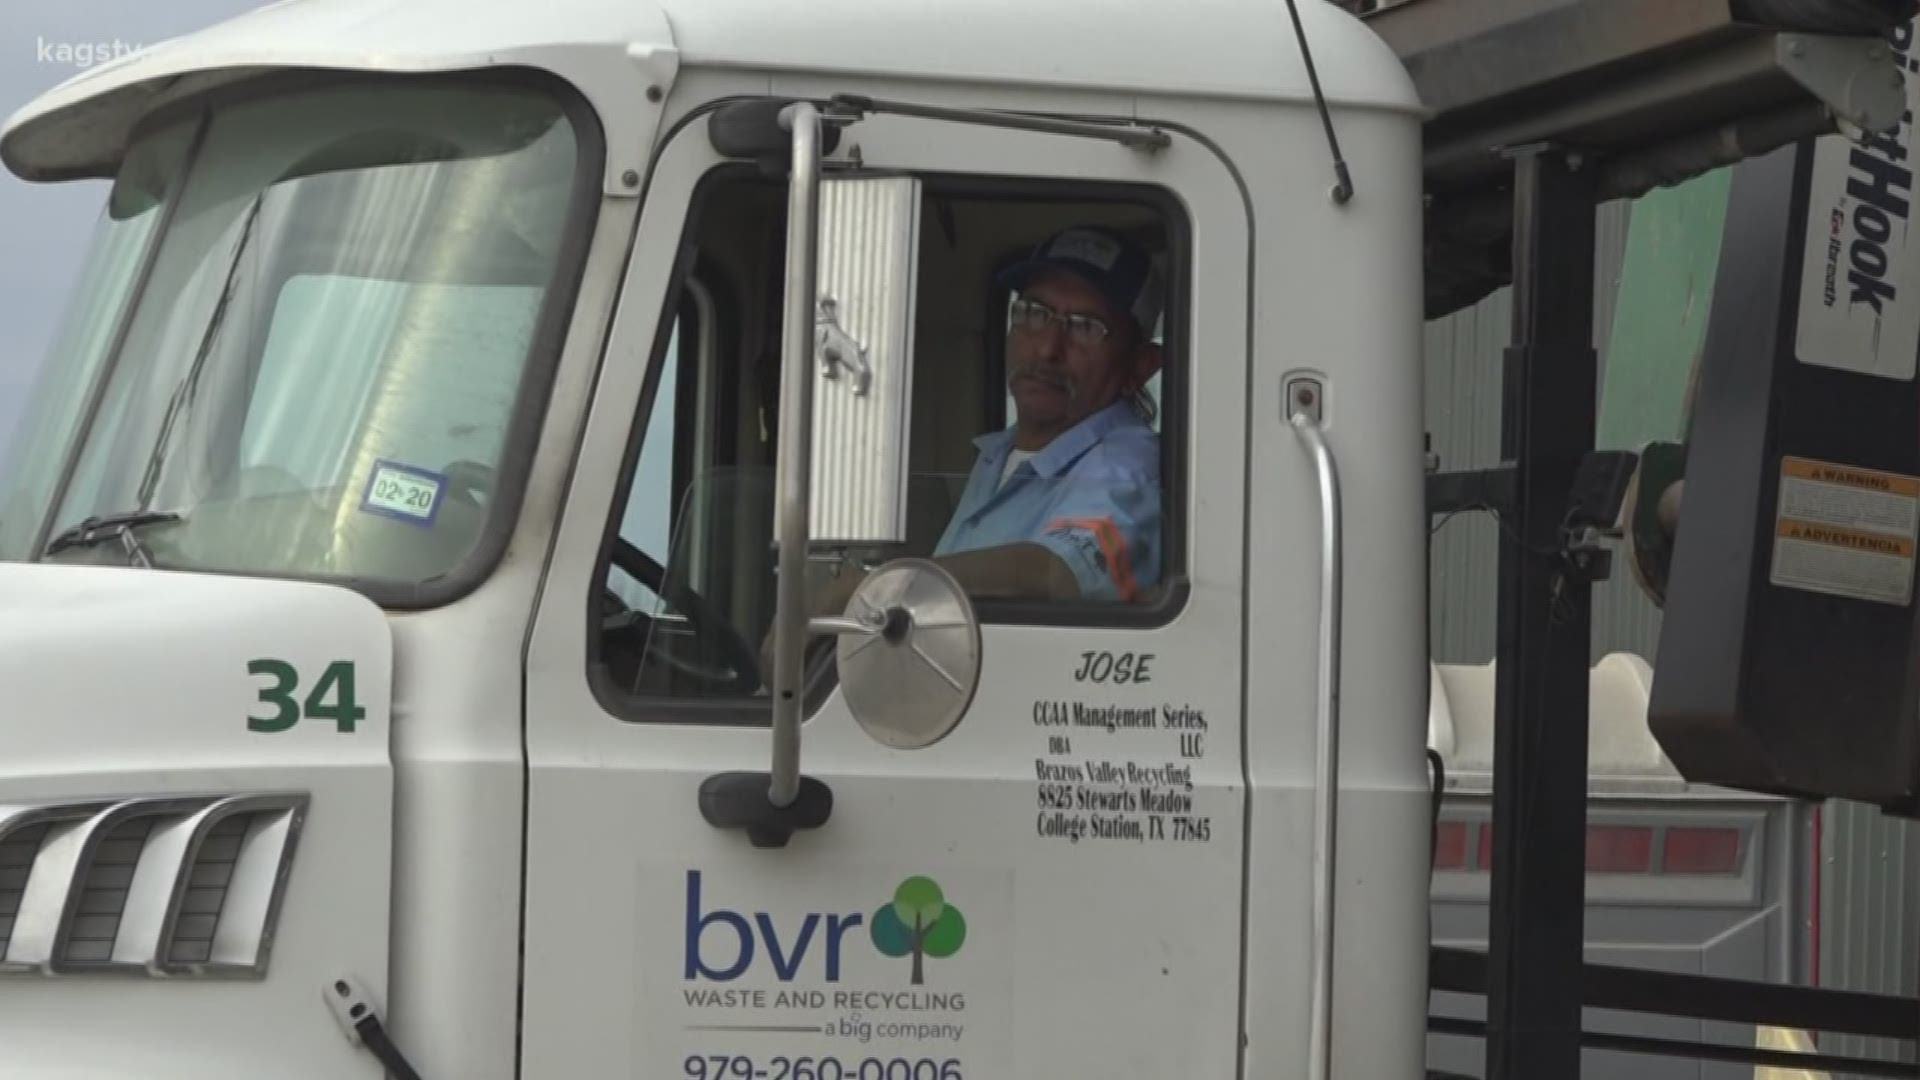 BVR Waste and Recycling says the two weeks after Christmas are some of their busiest days in the year.